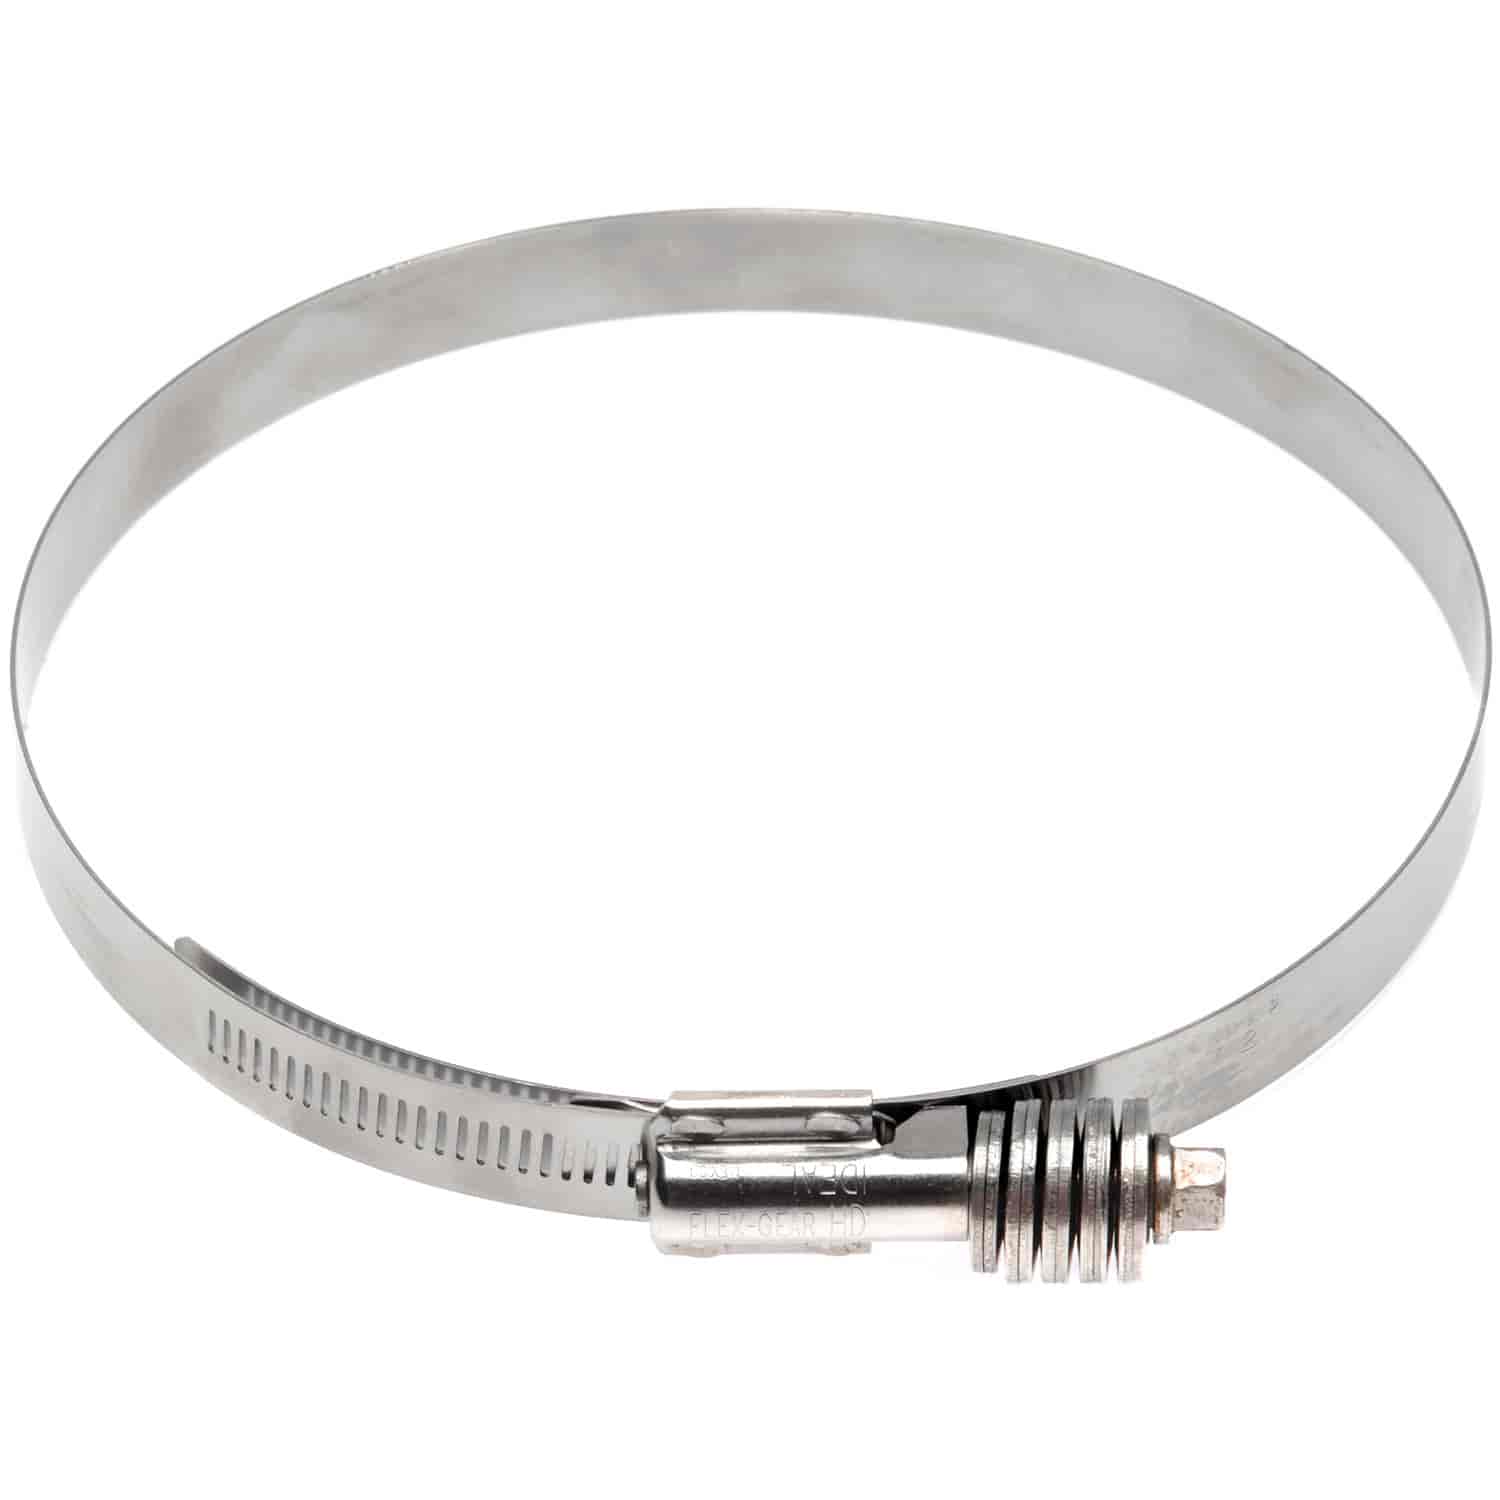 Stainless Steel Marine Hose Clamp [5.625 in. to 4.75 in. Outside Diameter]